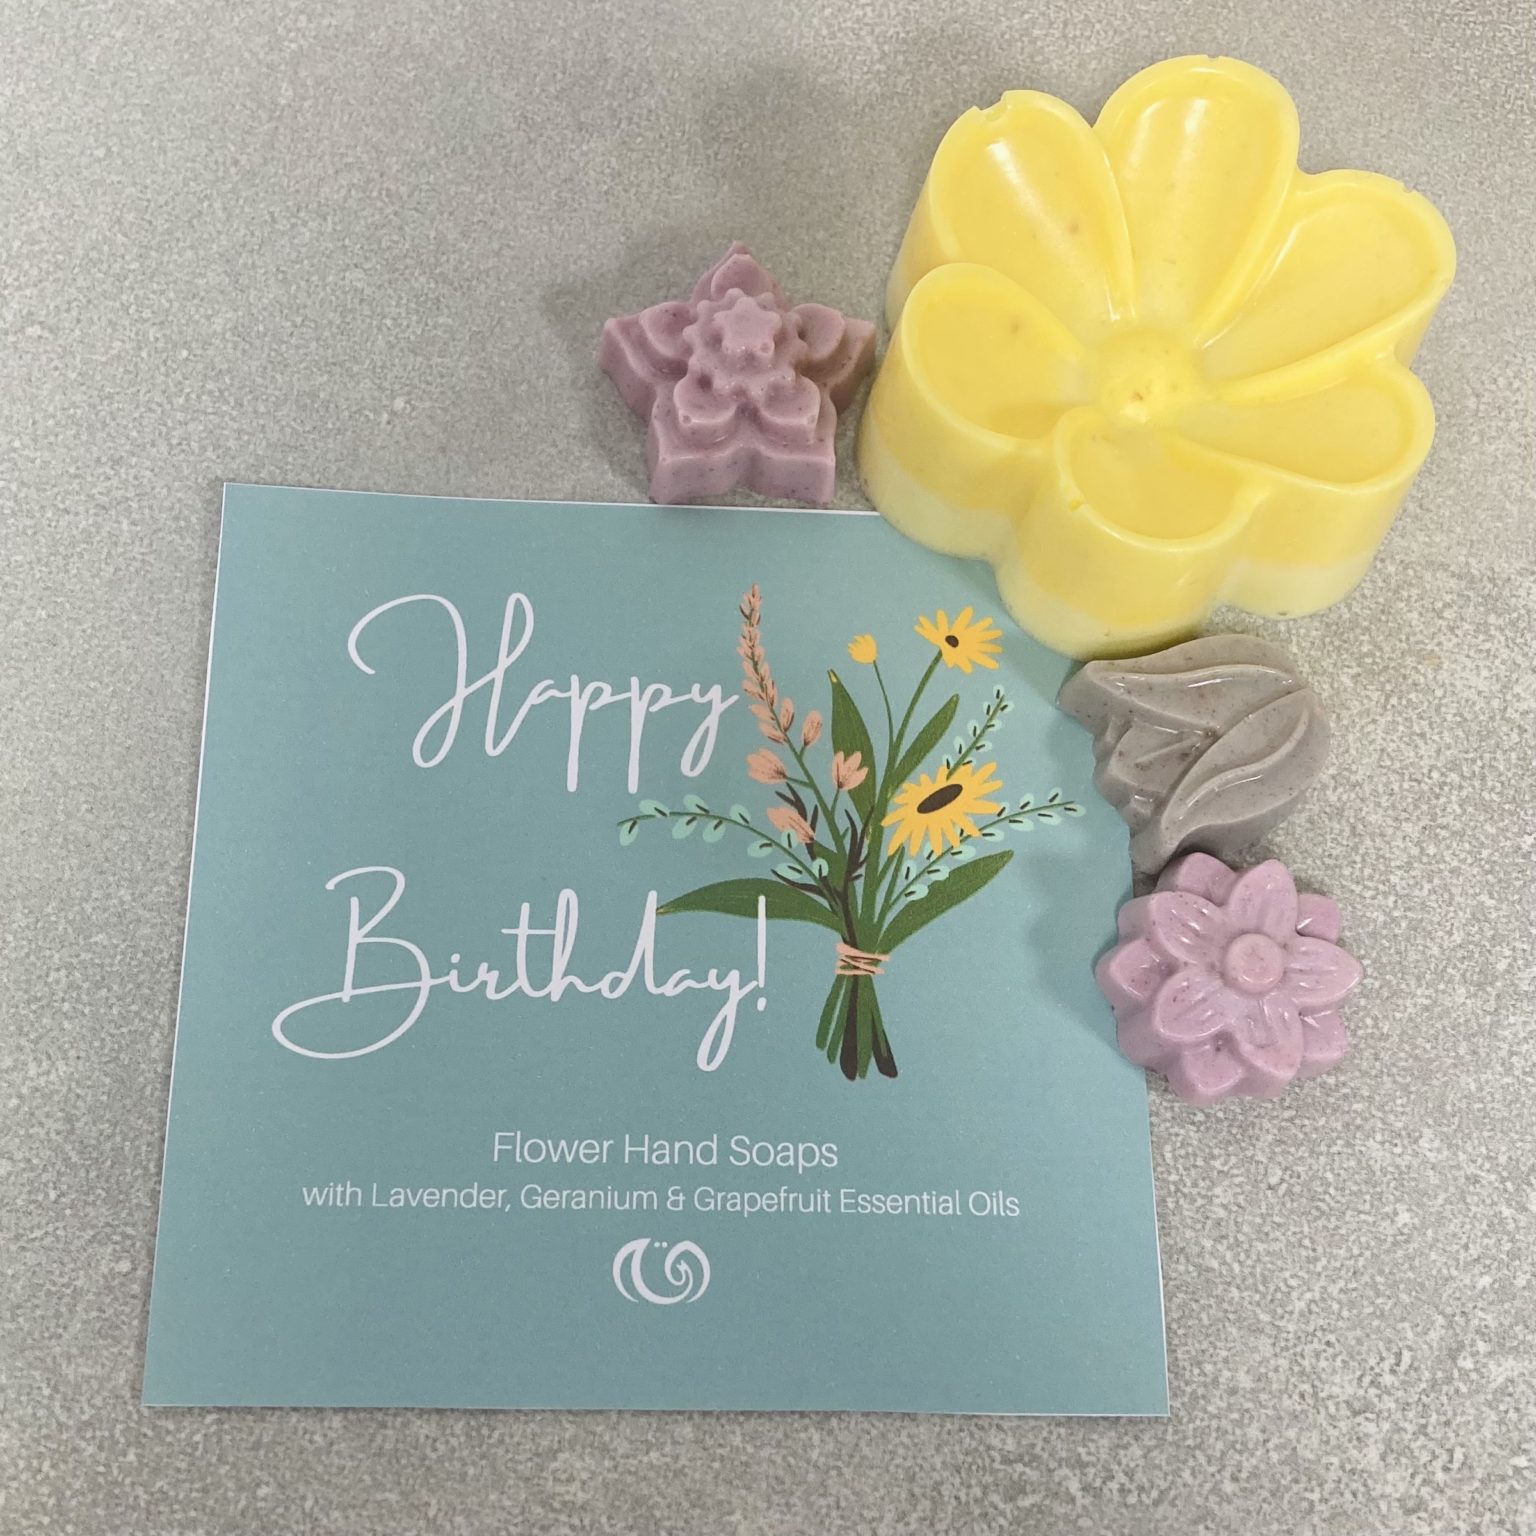 2 small purple a small grey and big yellow soap sit adjacent to a turquoise card reading Happy Birthday. Soap collection contains two large and one small soap.